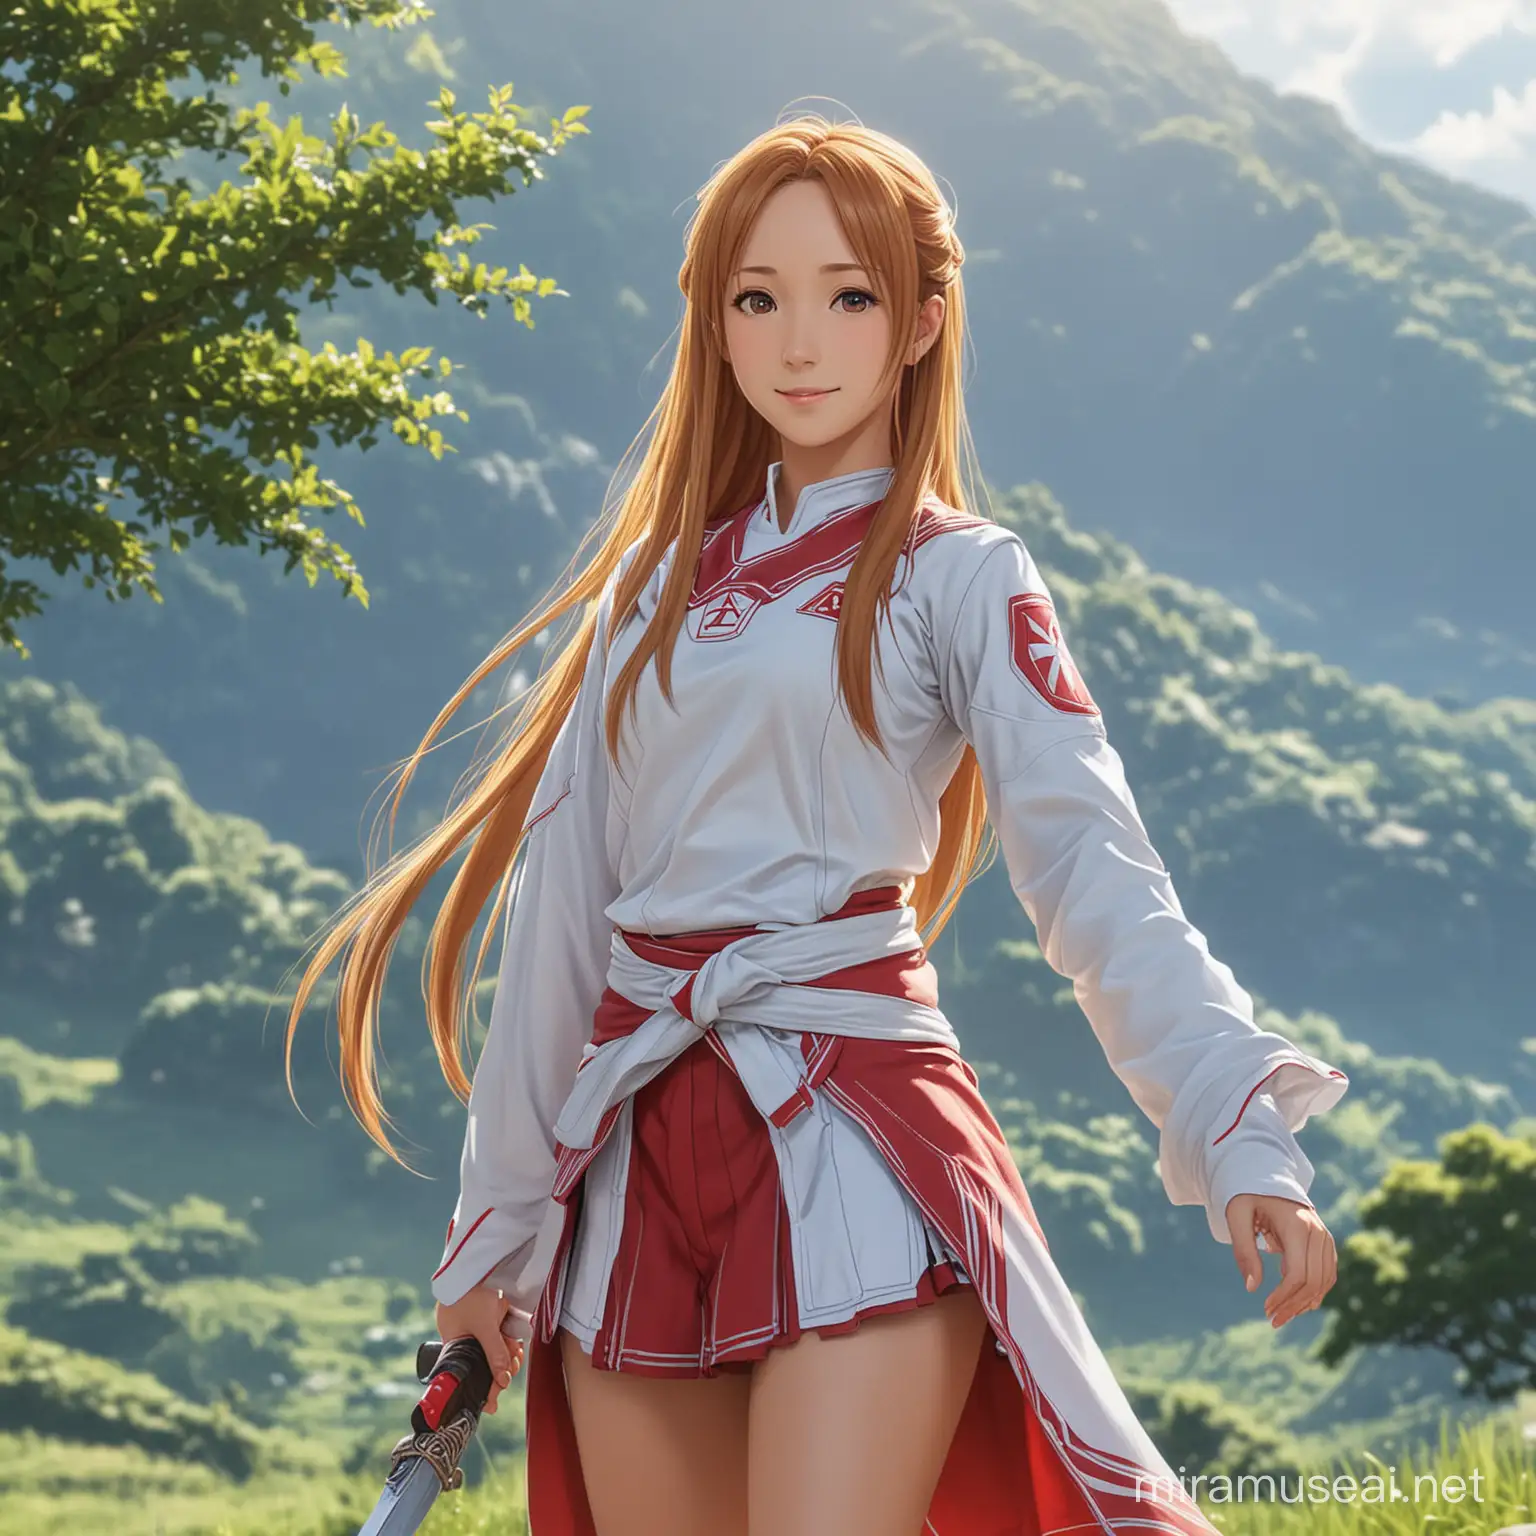 Draw the character Asuna from SAO, high quality, natural lighting, long shot, outdoors, countryside, standing, casual pose, trendy clothing, smiling at the viewer